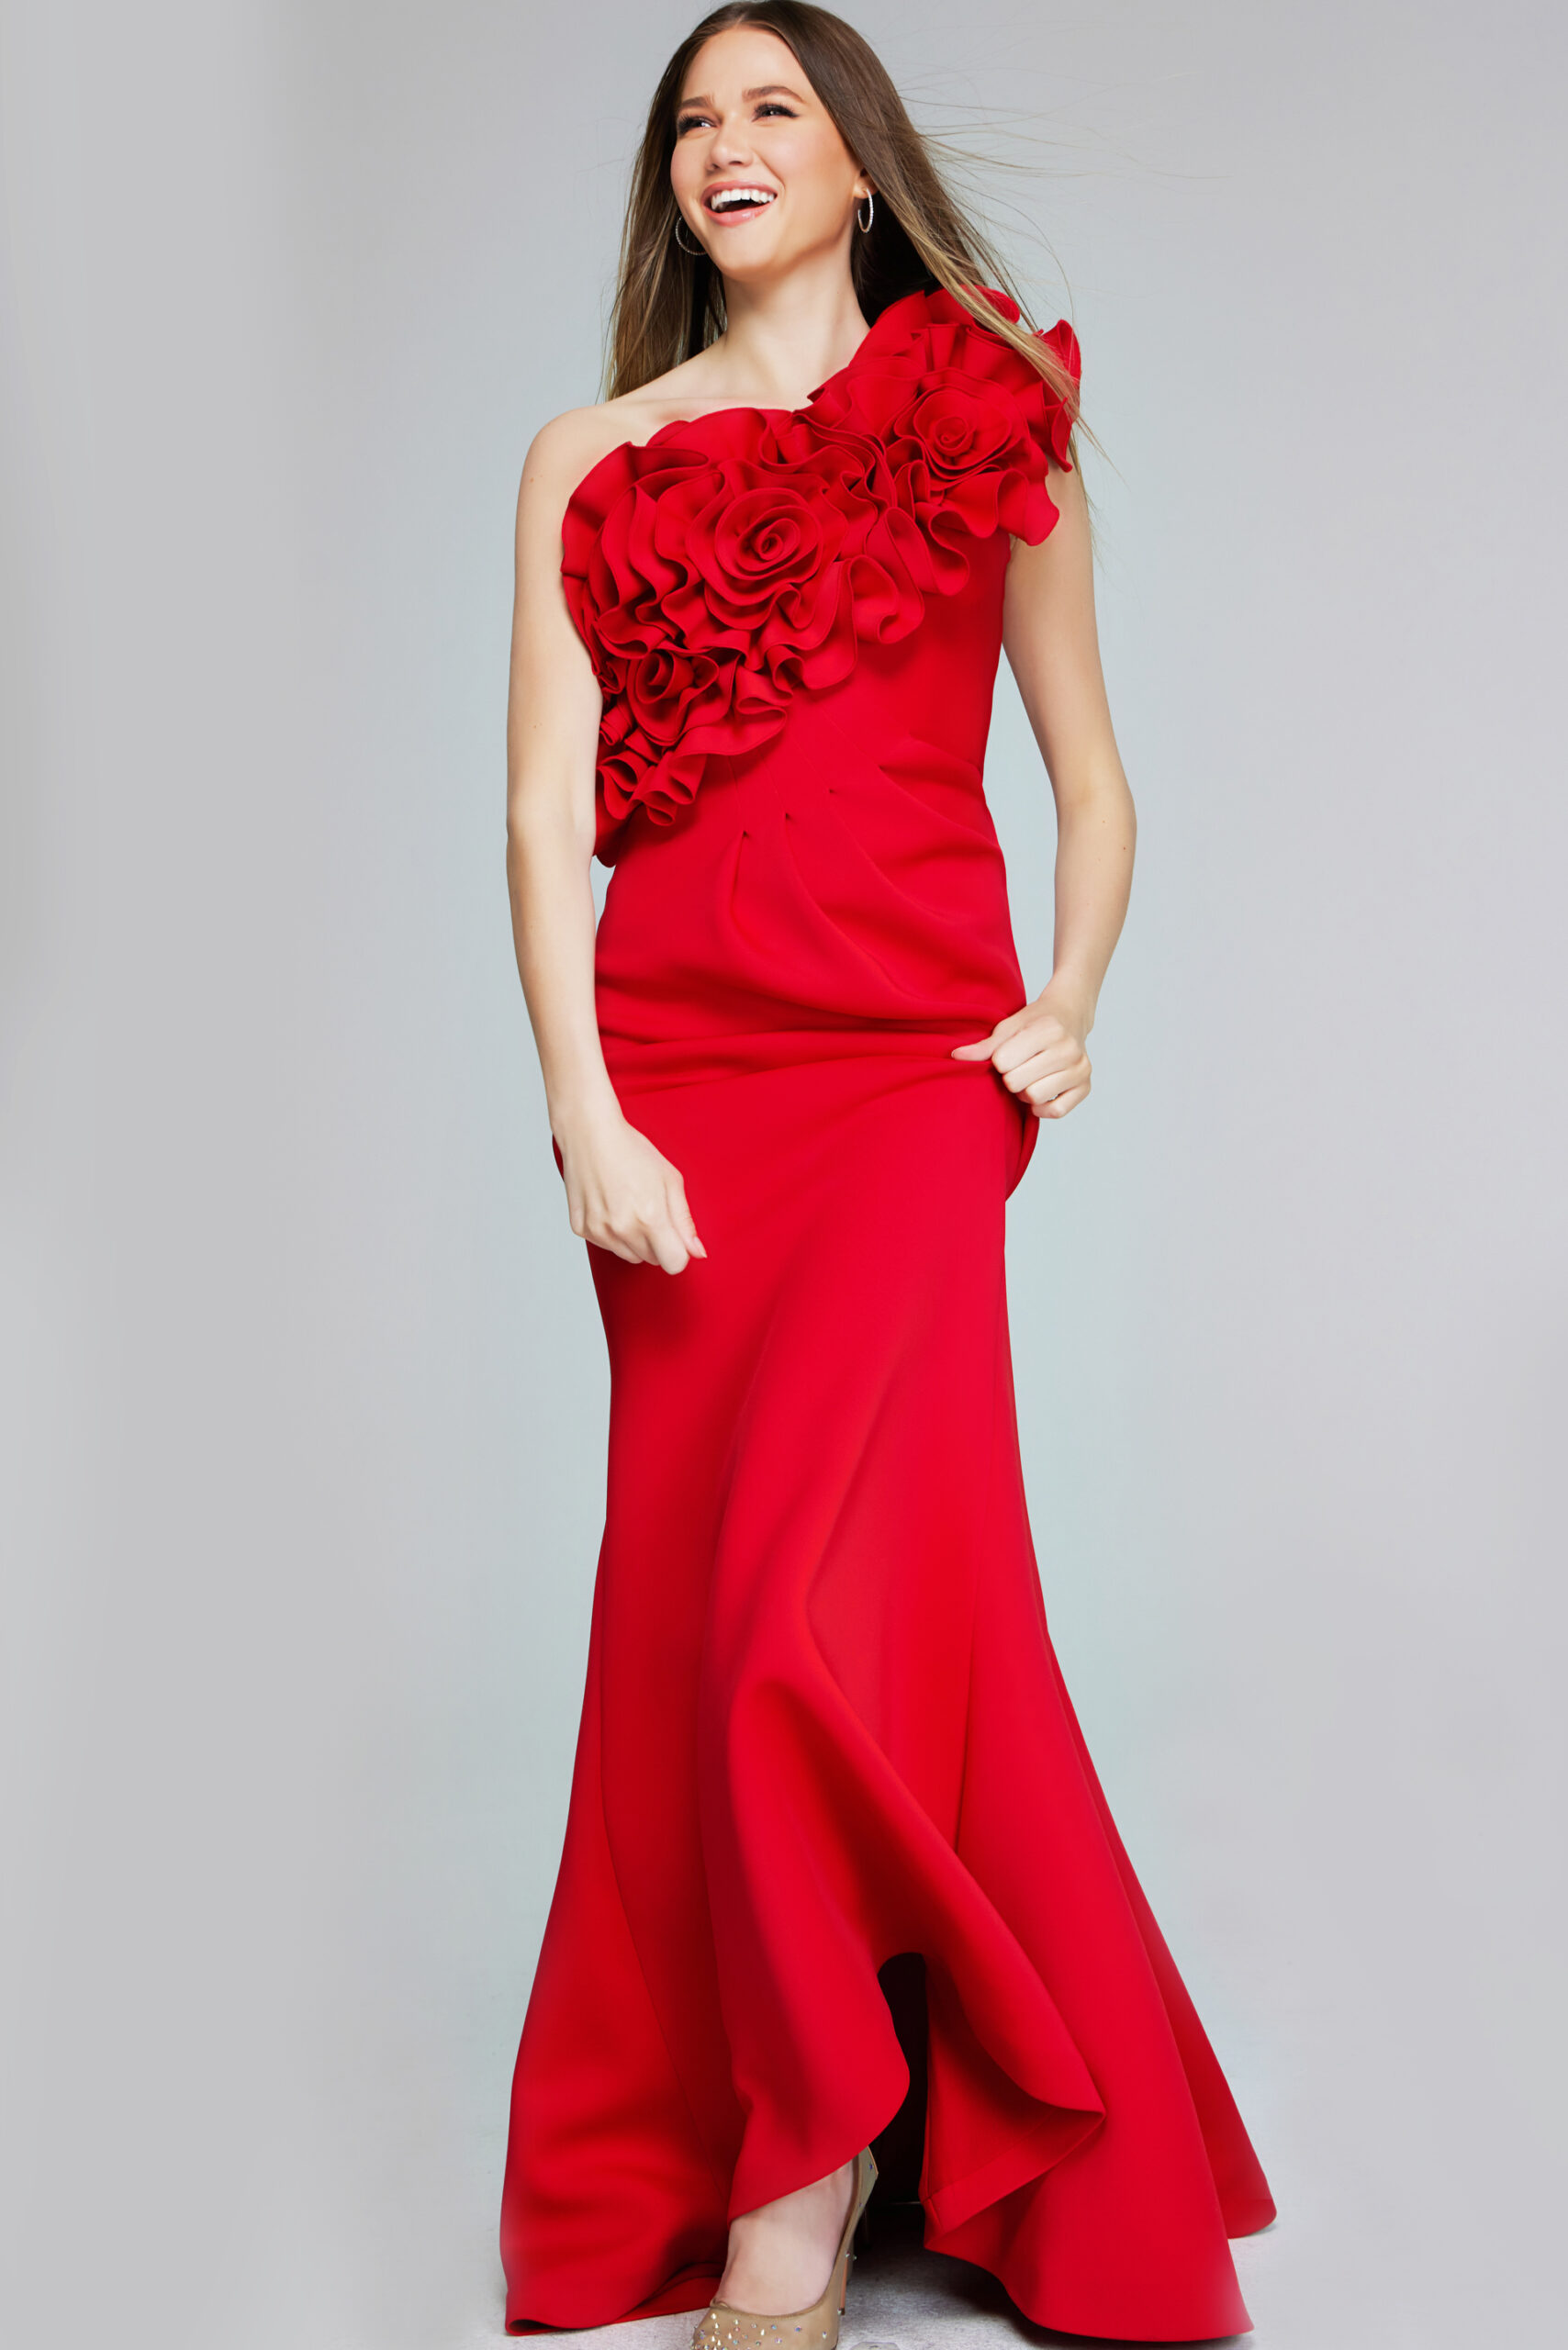 Model wearing Enchanting One-Shoulder Red Gown with 3D Floral Appliqué 39751